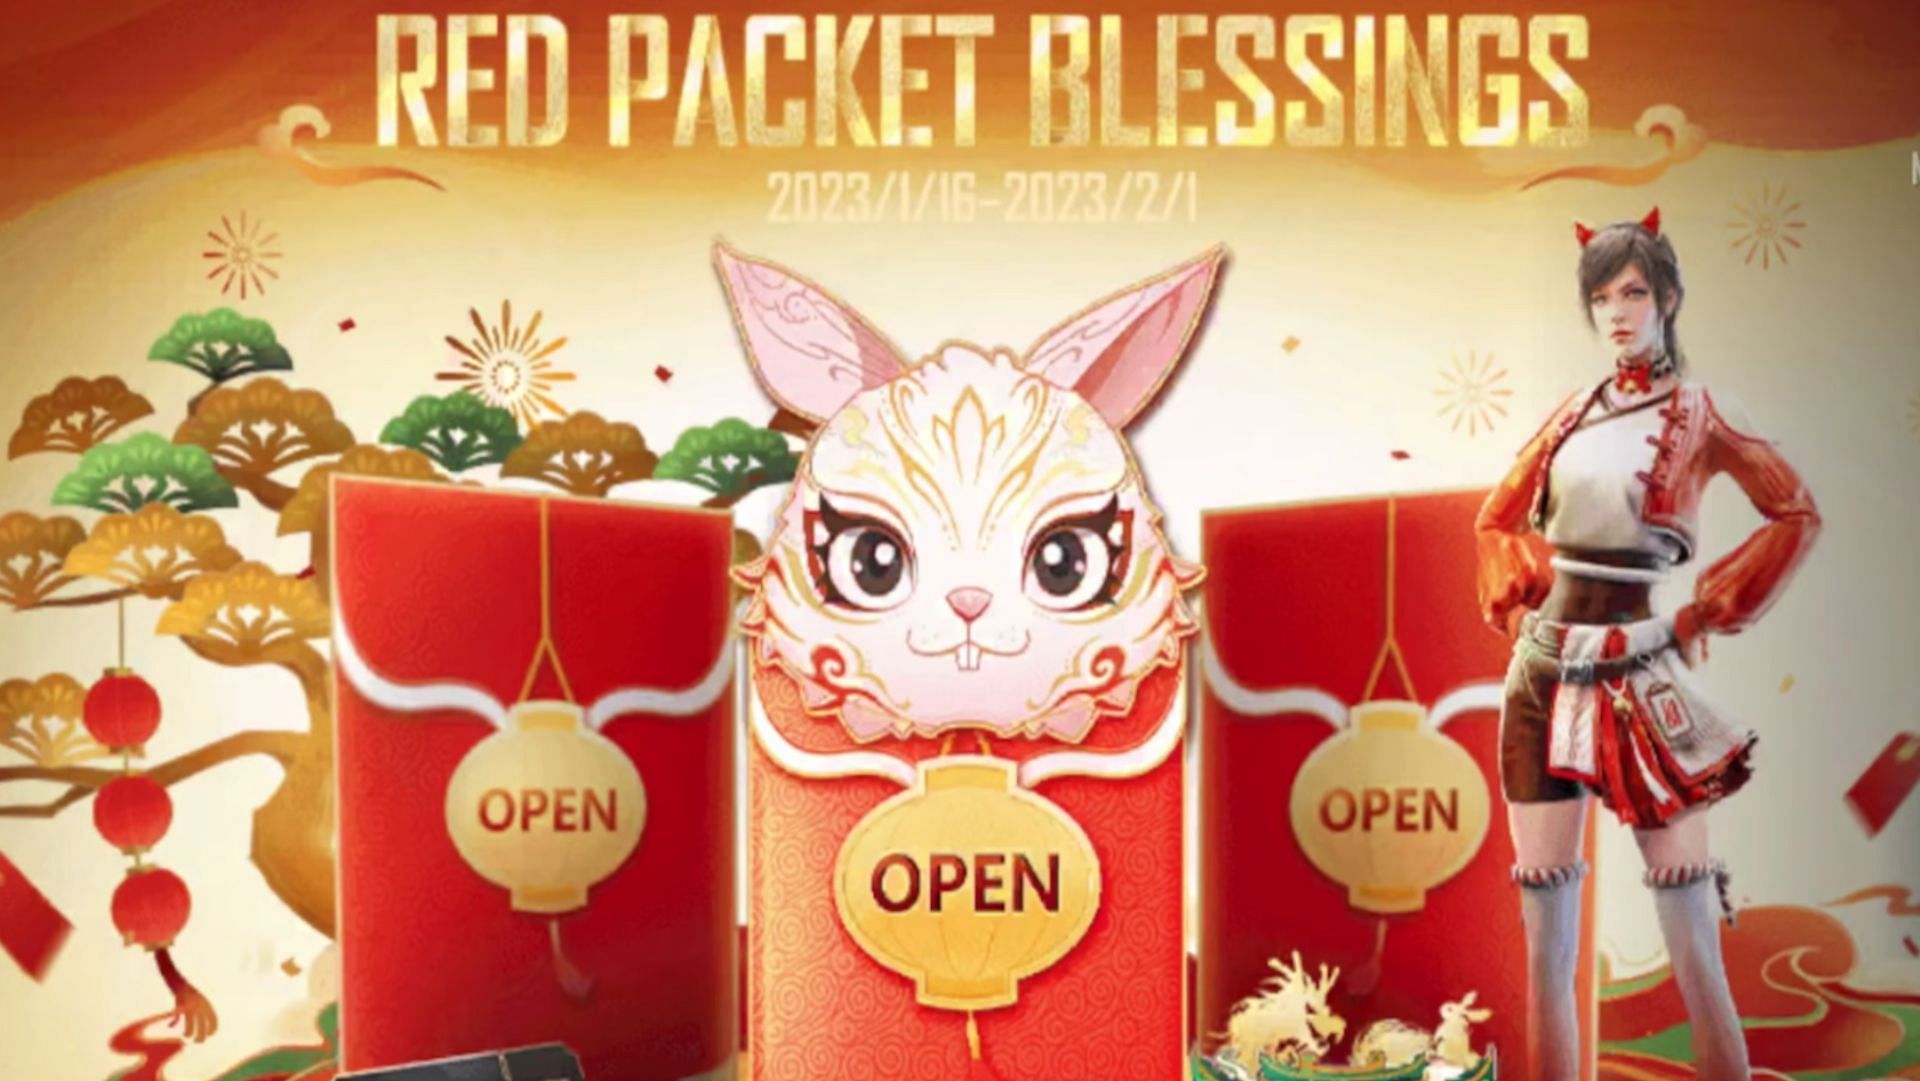 Red Packet Blessings event has arrived in PUBG Mobile (Image via Tencent Games)